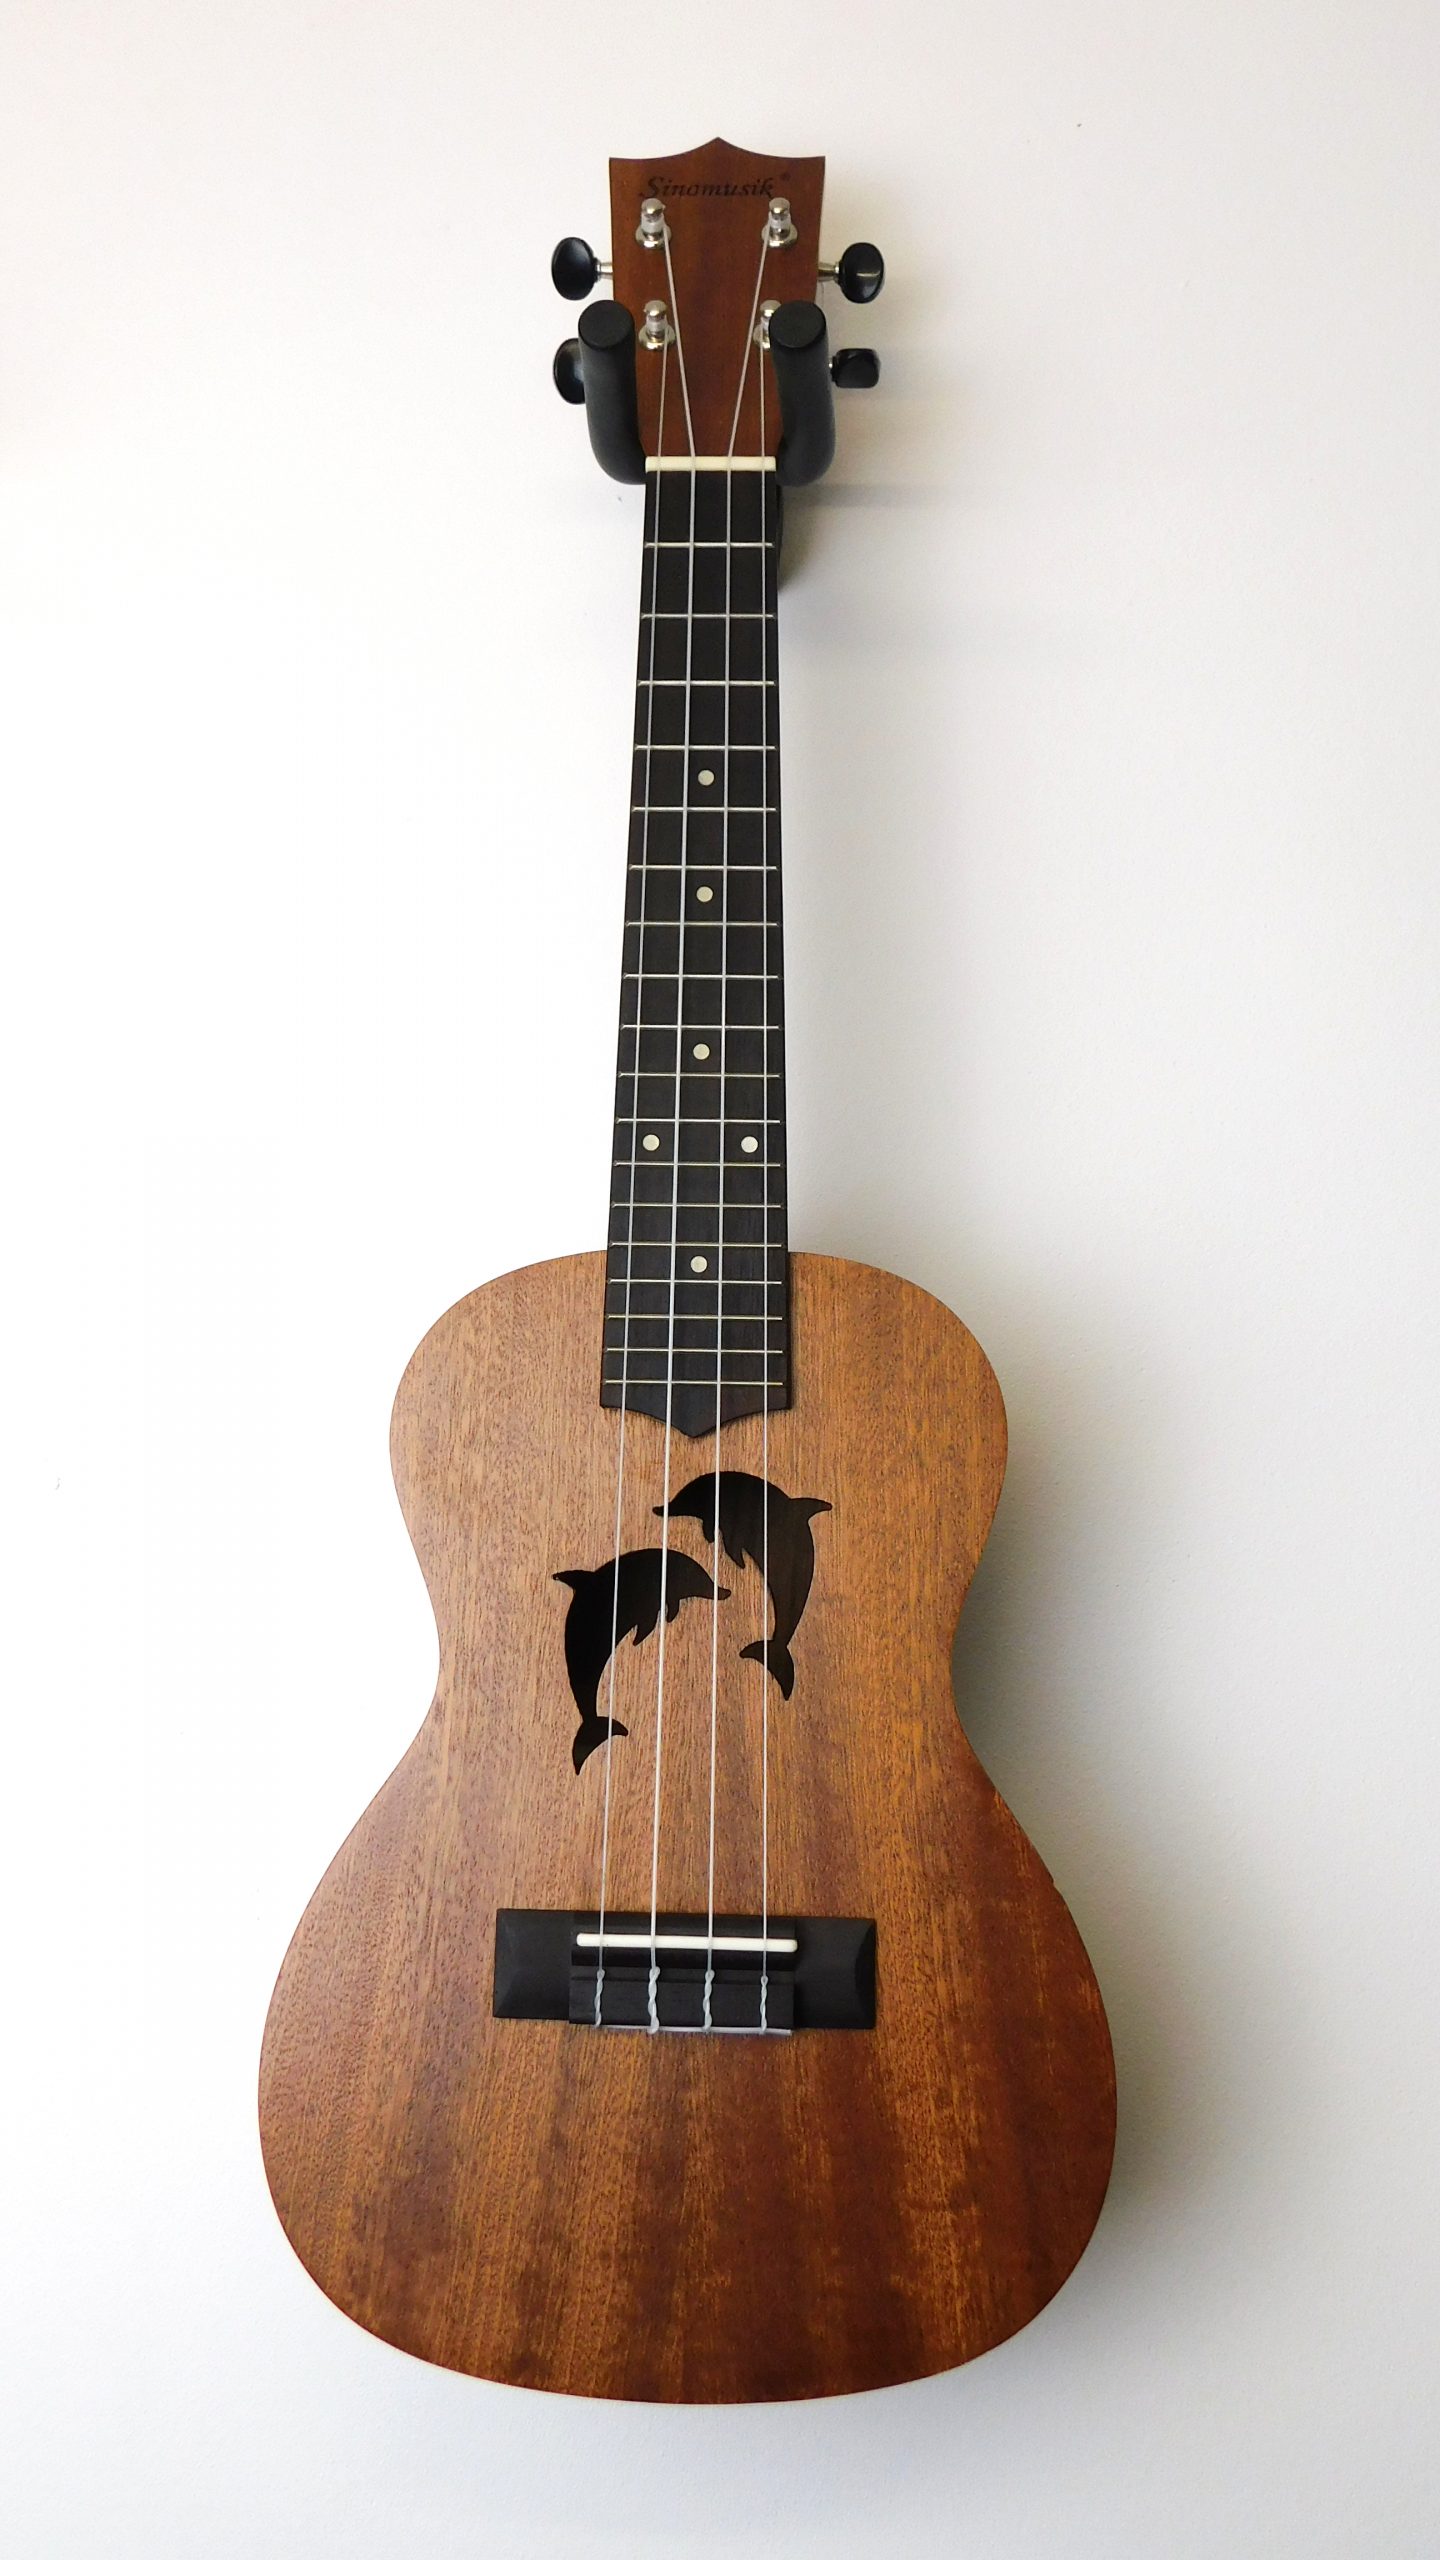 Aiersi dolphin soundhole mahogany concert ukulele for sale in Sheffield